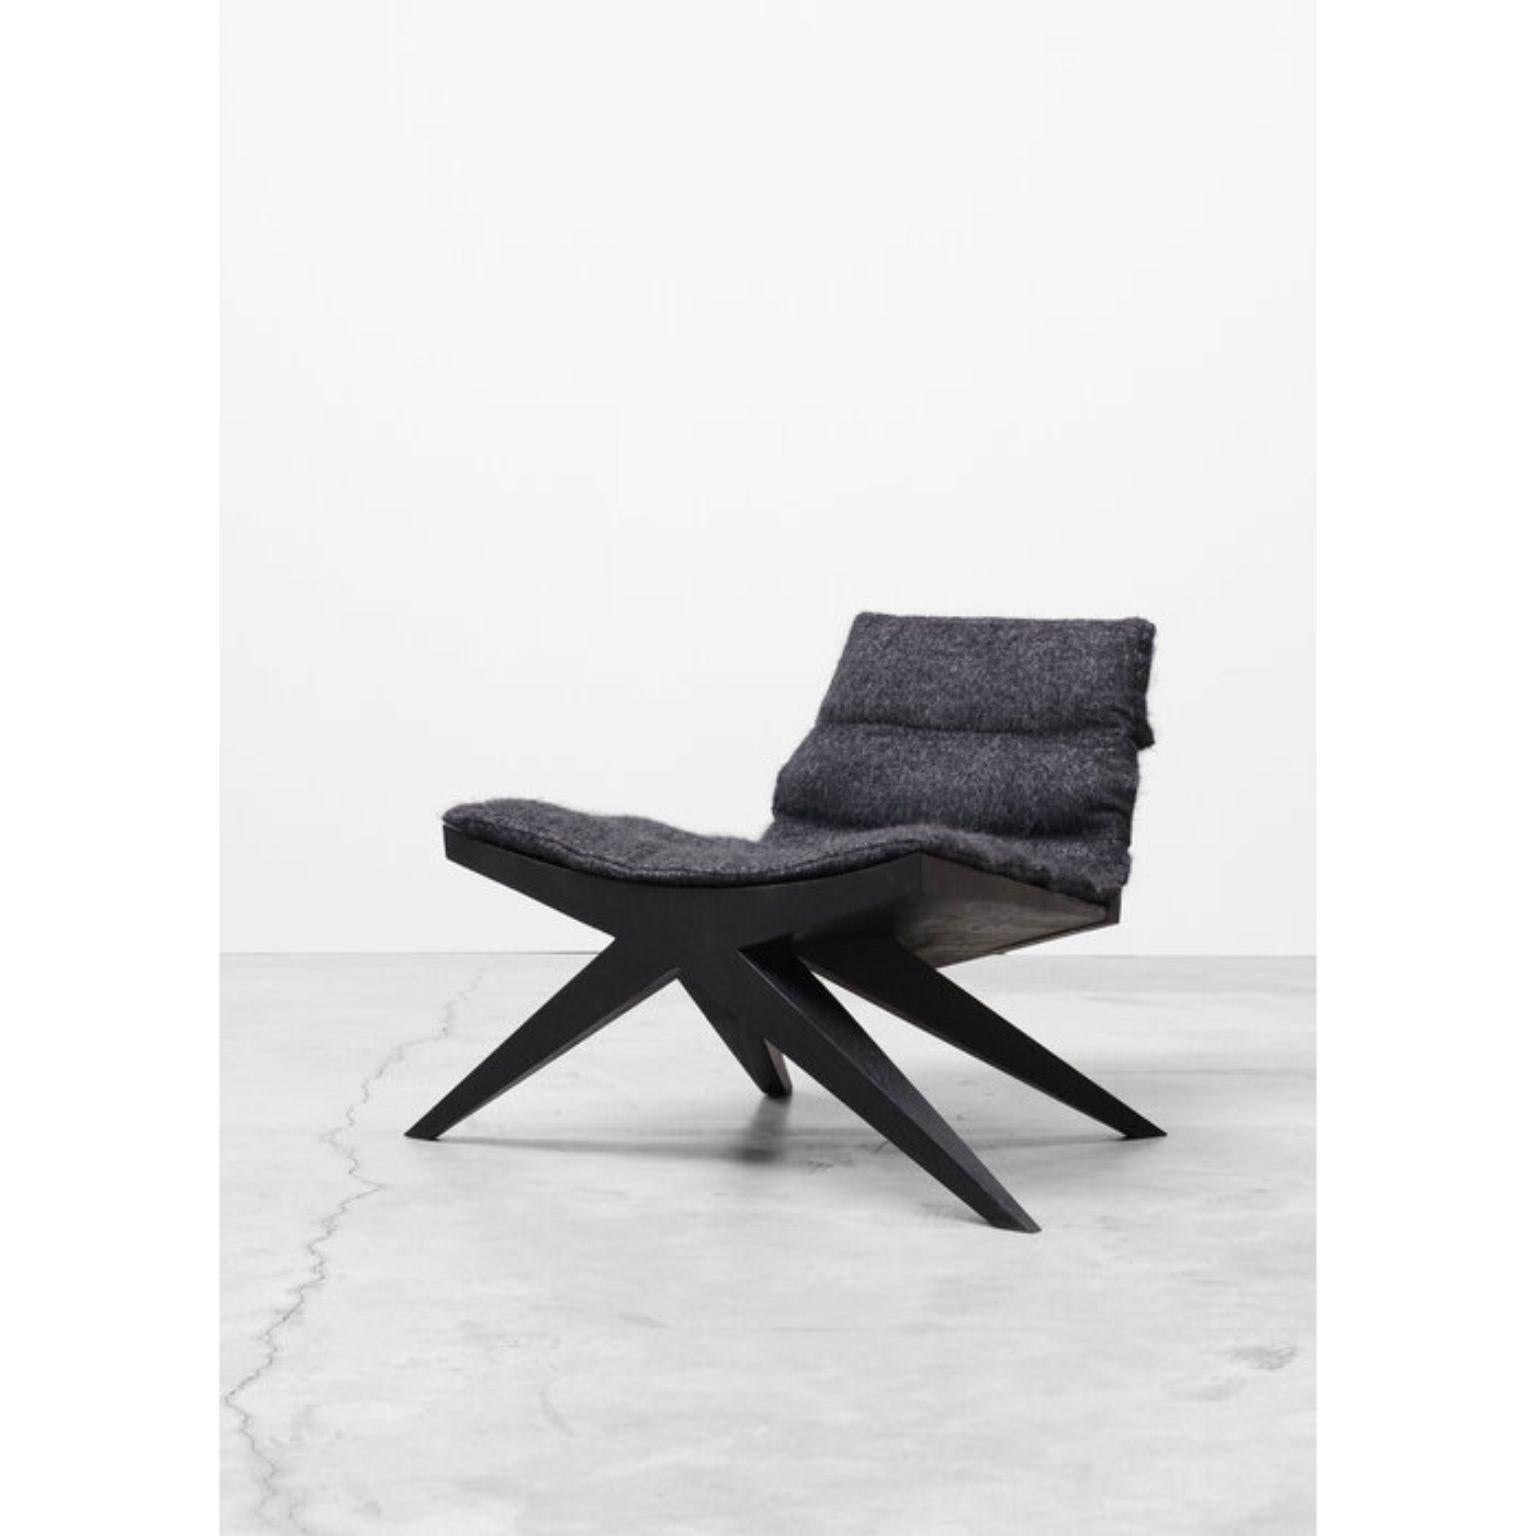 V-easy chair in iroko wood by Arno Declercq
Dimensions: W 100 x D 70 x H 70 cm 
Materials: Burned and waxed iroko wood

Cushion made in mohair by Pierre Frey more fabrics available and price on request. 

Arno Declercq
Belgian designer and